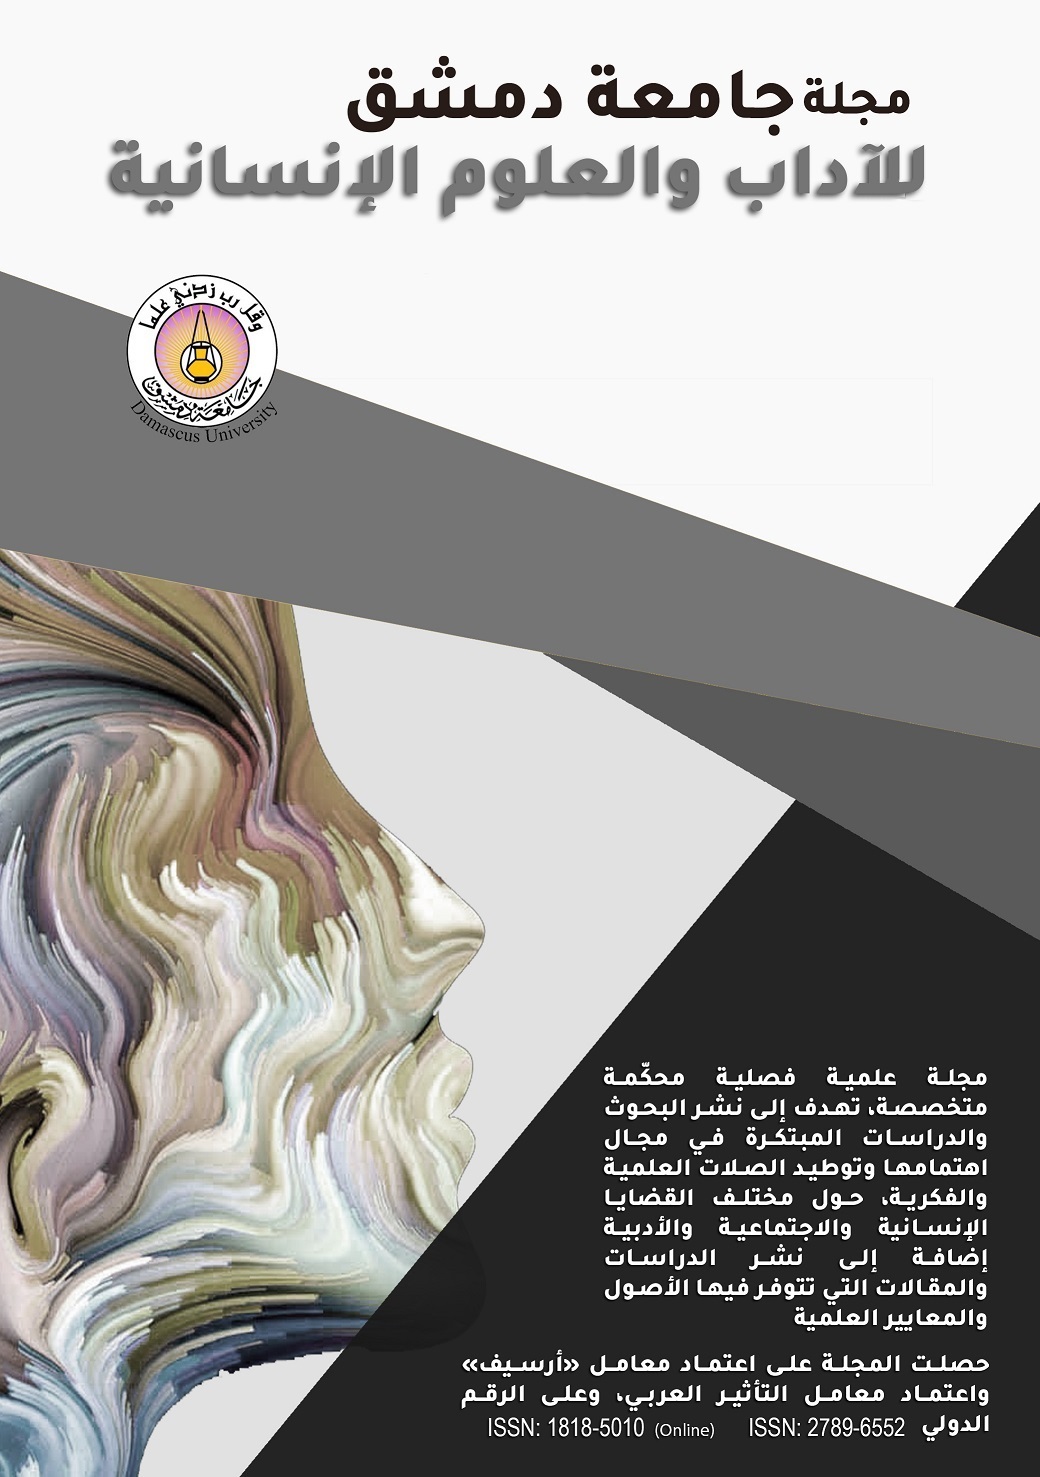 					View Vol. 38 No. 4 (2022): Damascus University Journal of Arts And Humanities
				